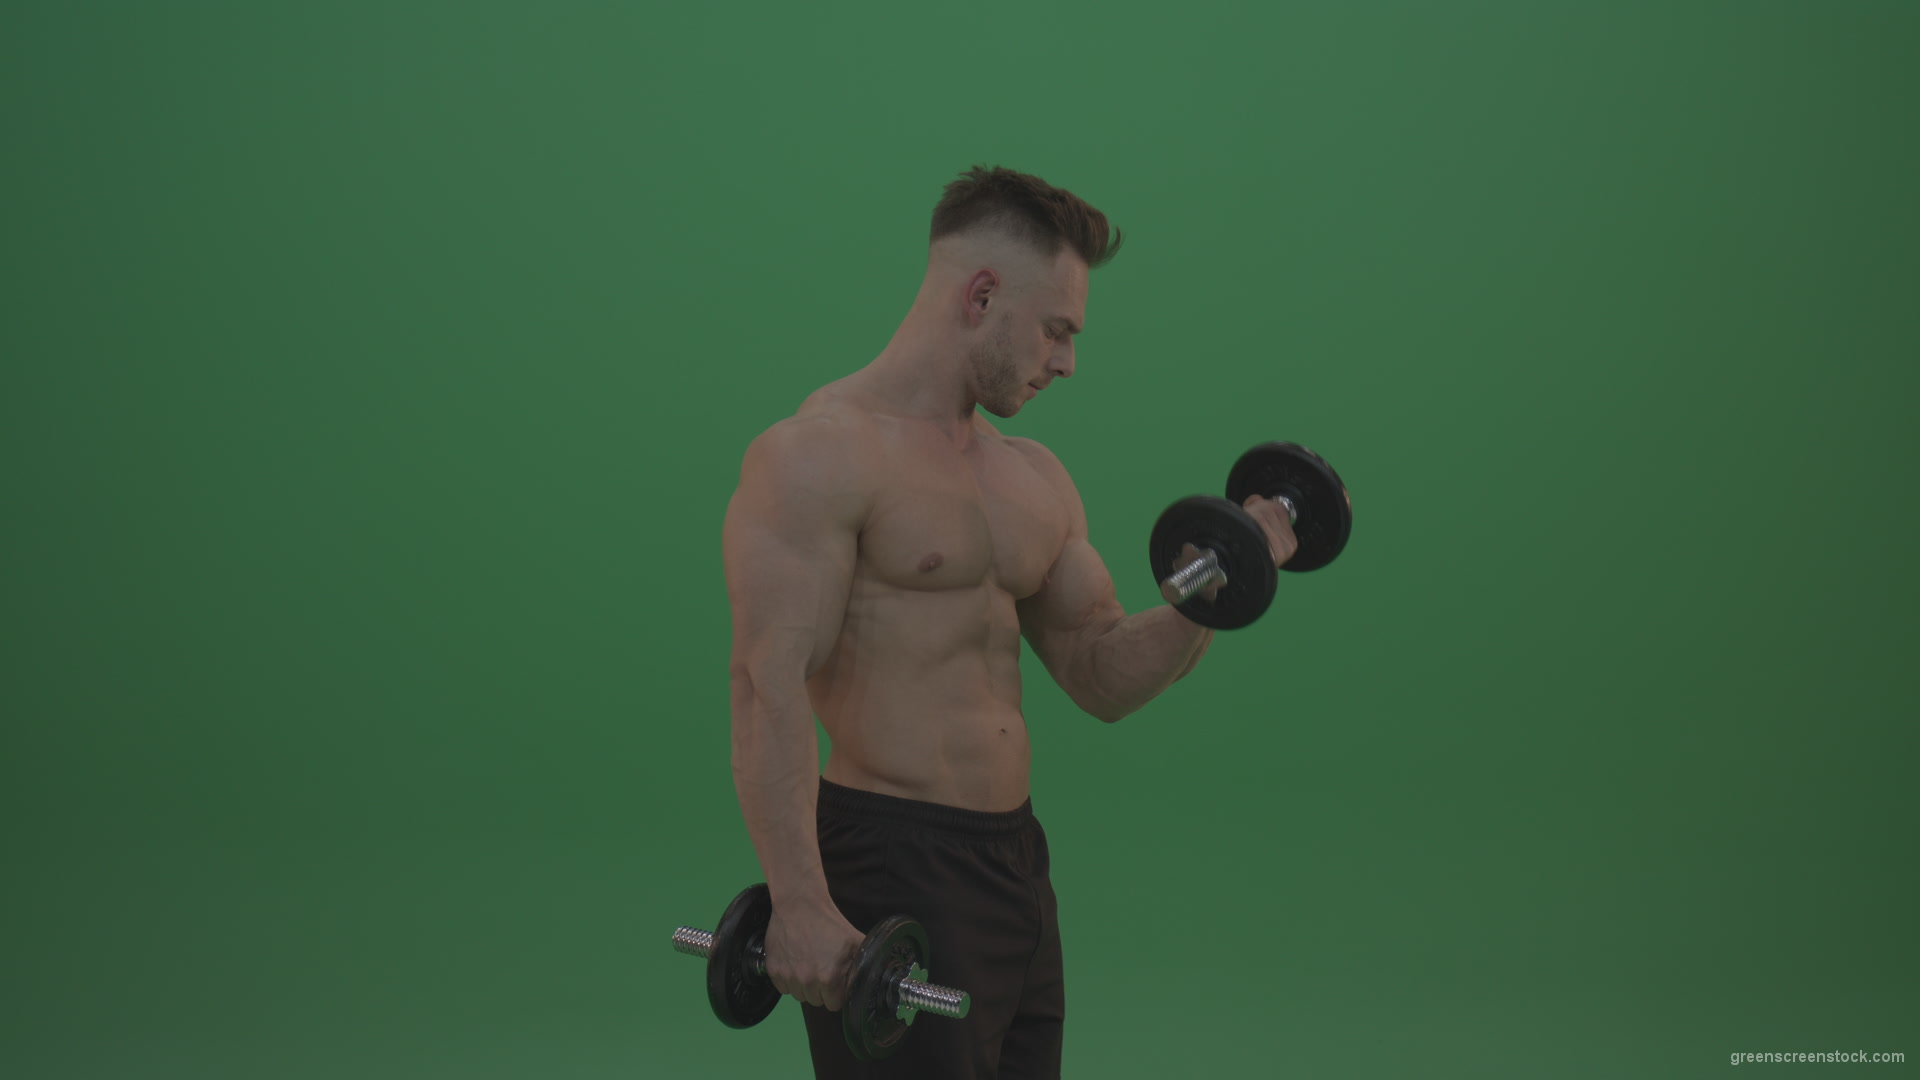 Young_Bodybuilder_Working_Out_Two_Handed_Dumbbell_Push_Ups_Excercise_On_Green_Screen_Wall_Background_004 Green Screen Stock